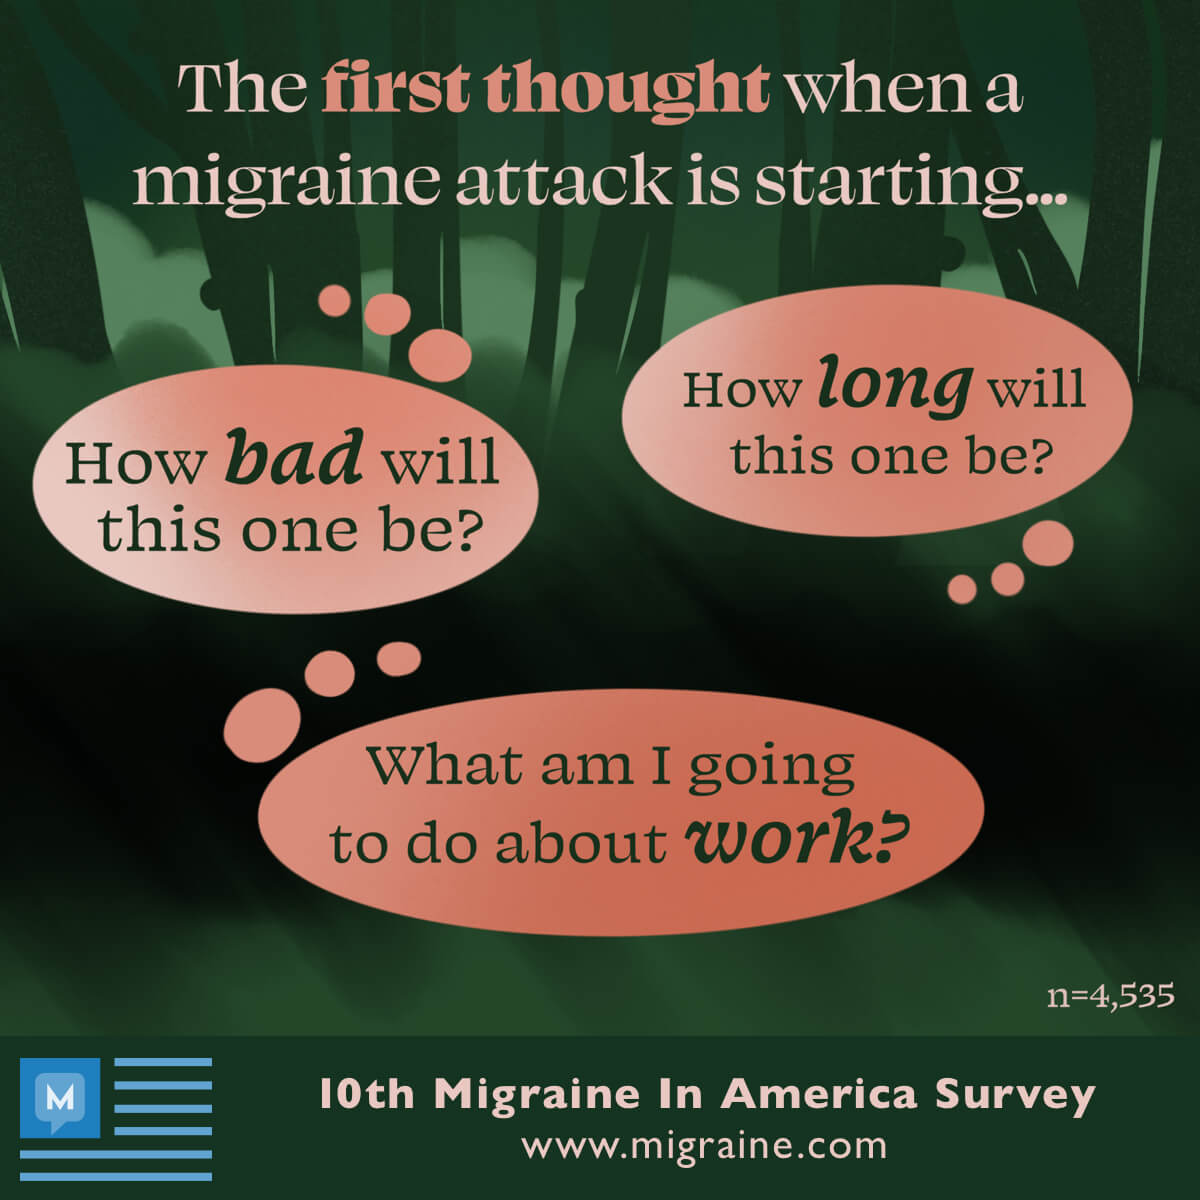 Migraine In America Survey respondents question the unpredictability of life when they feel a migraine attack starting.